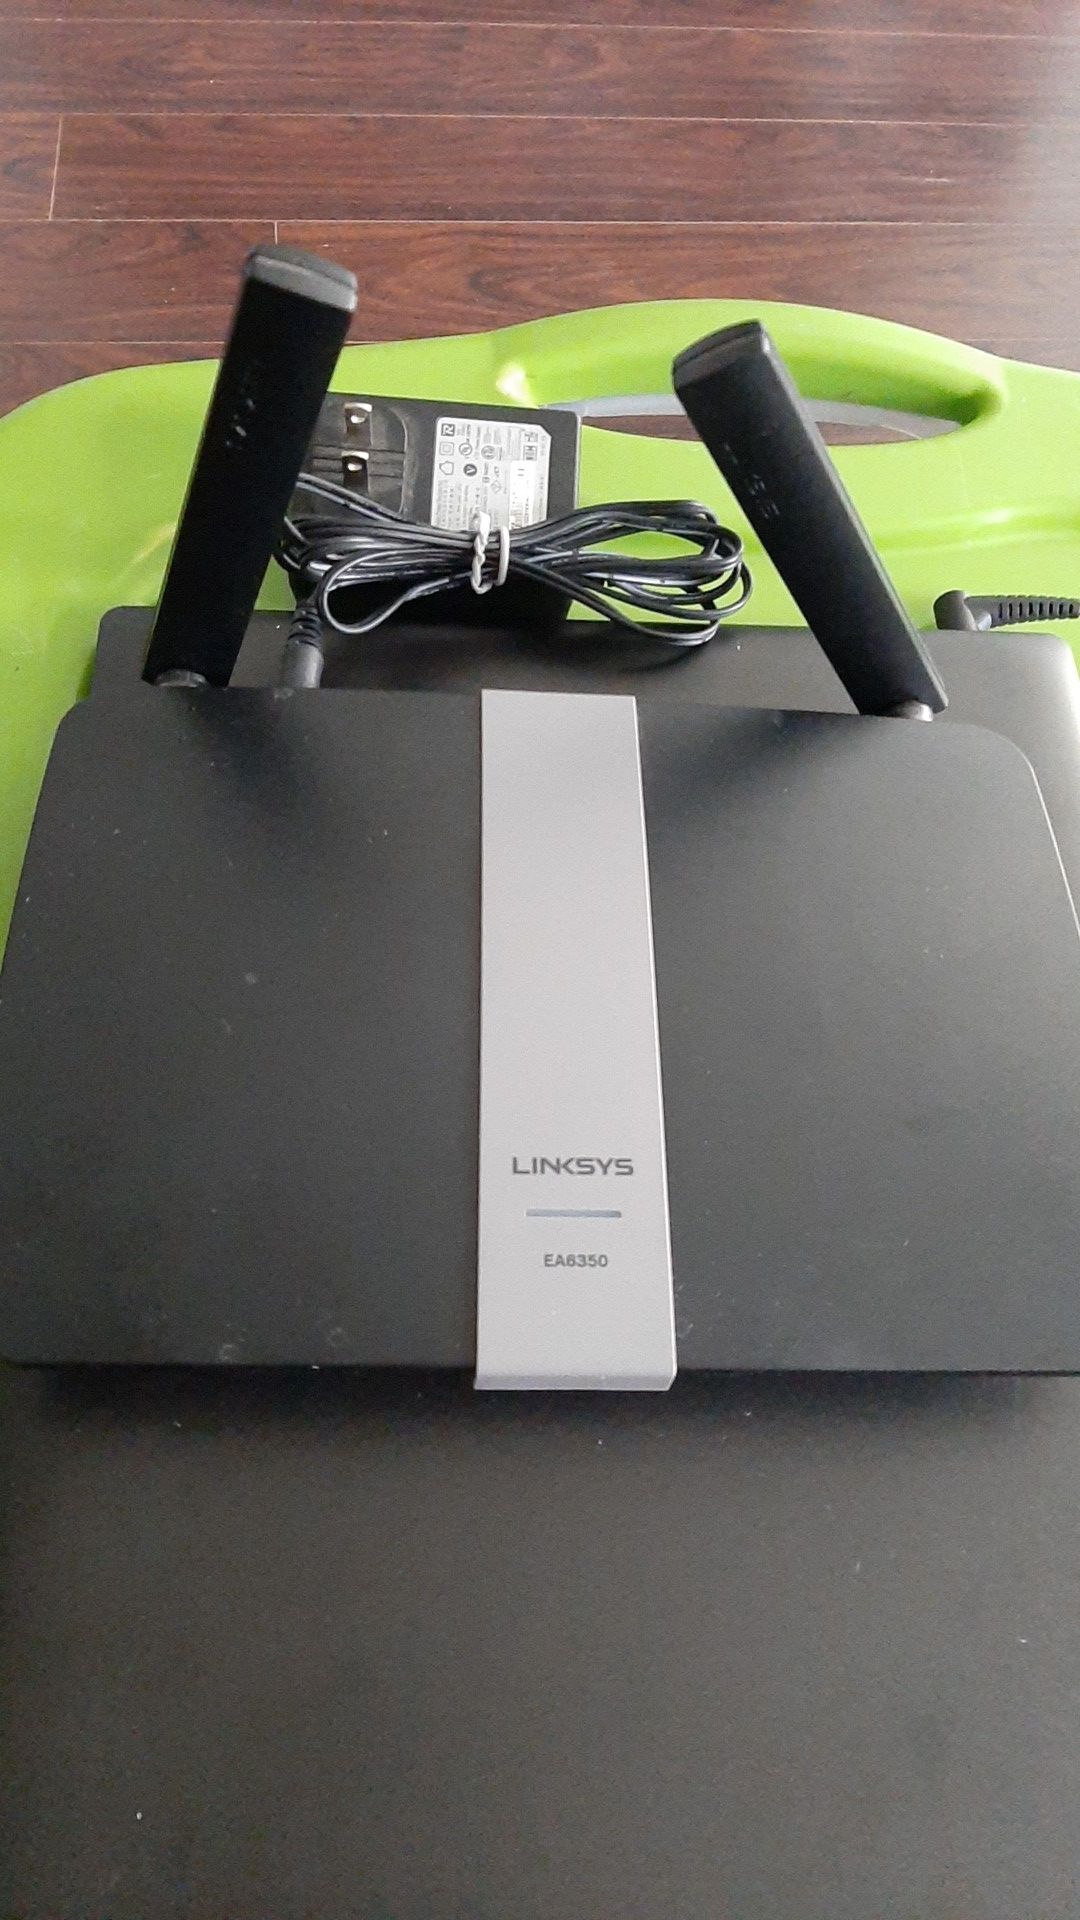 Linksys Dual Band router EA6350